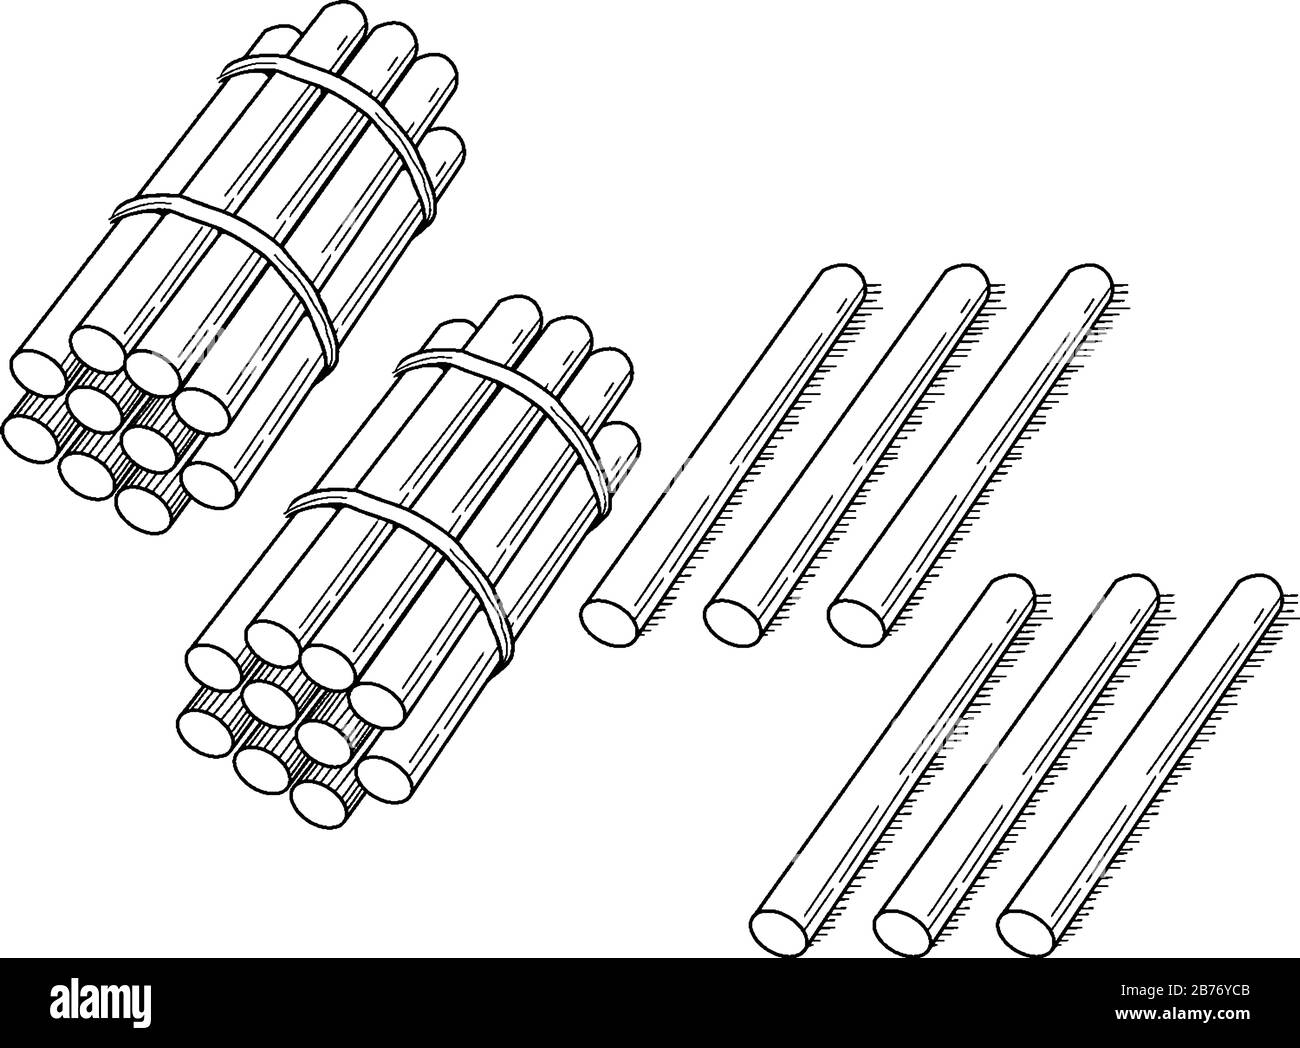 A typical representation of a bundle of 26 sticks bundled in tens that can be used when teaching counting, grouping, and place value, vintage line dra Stock Vector